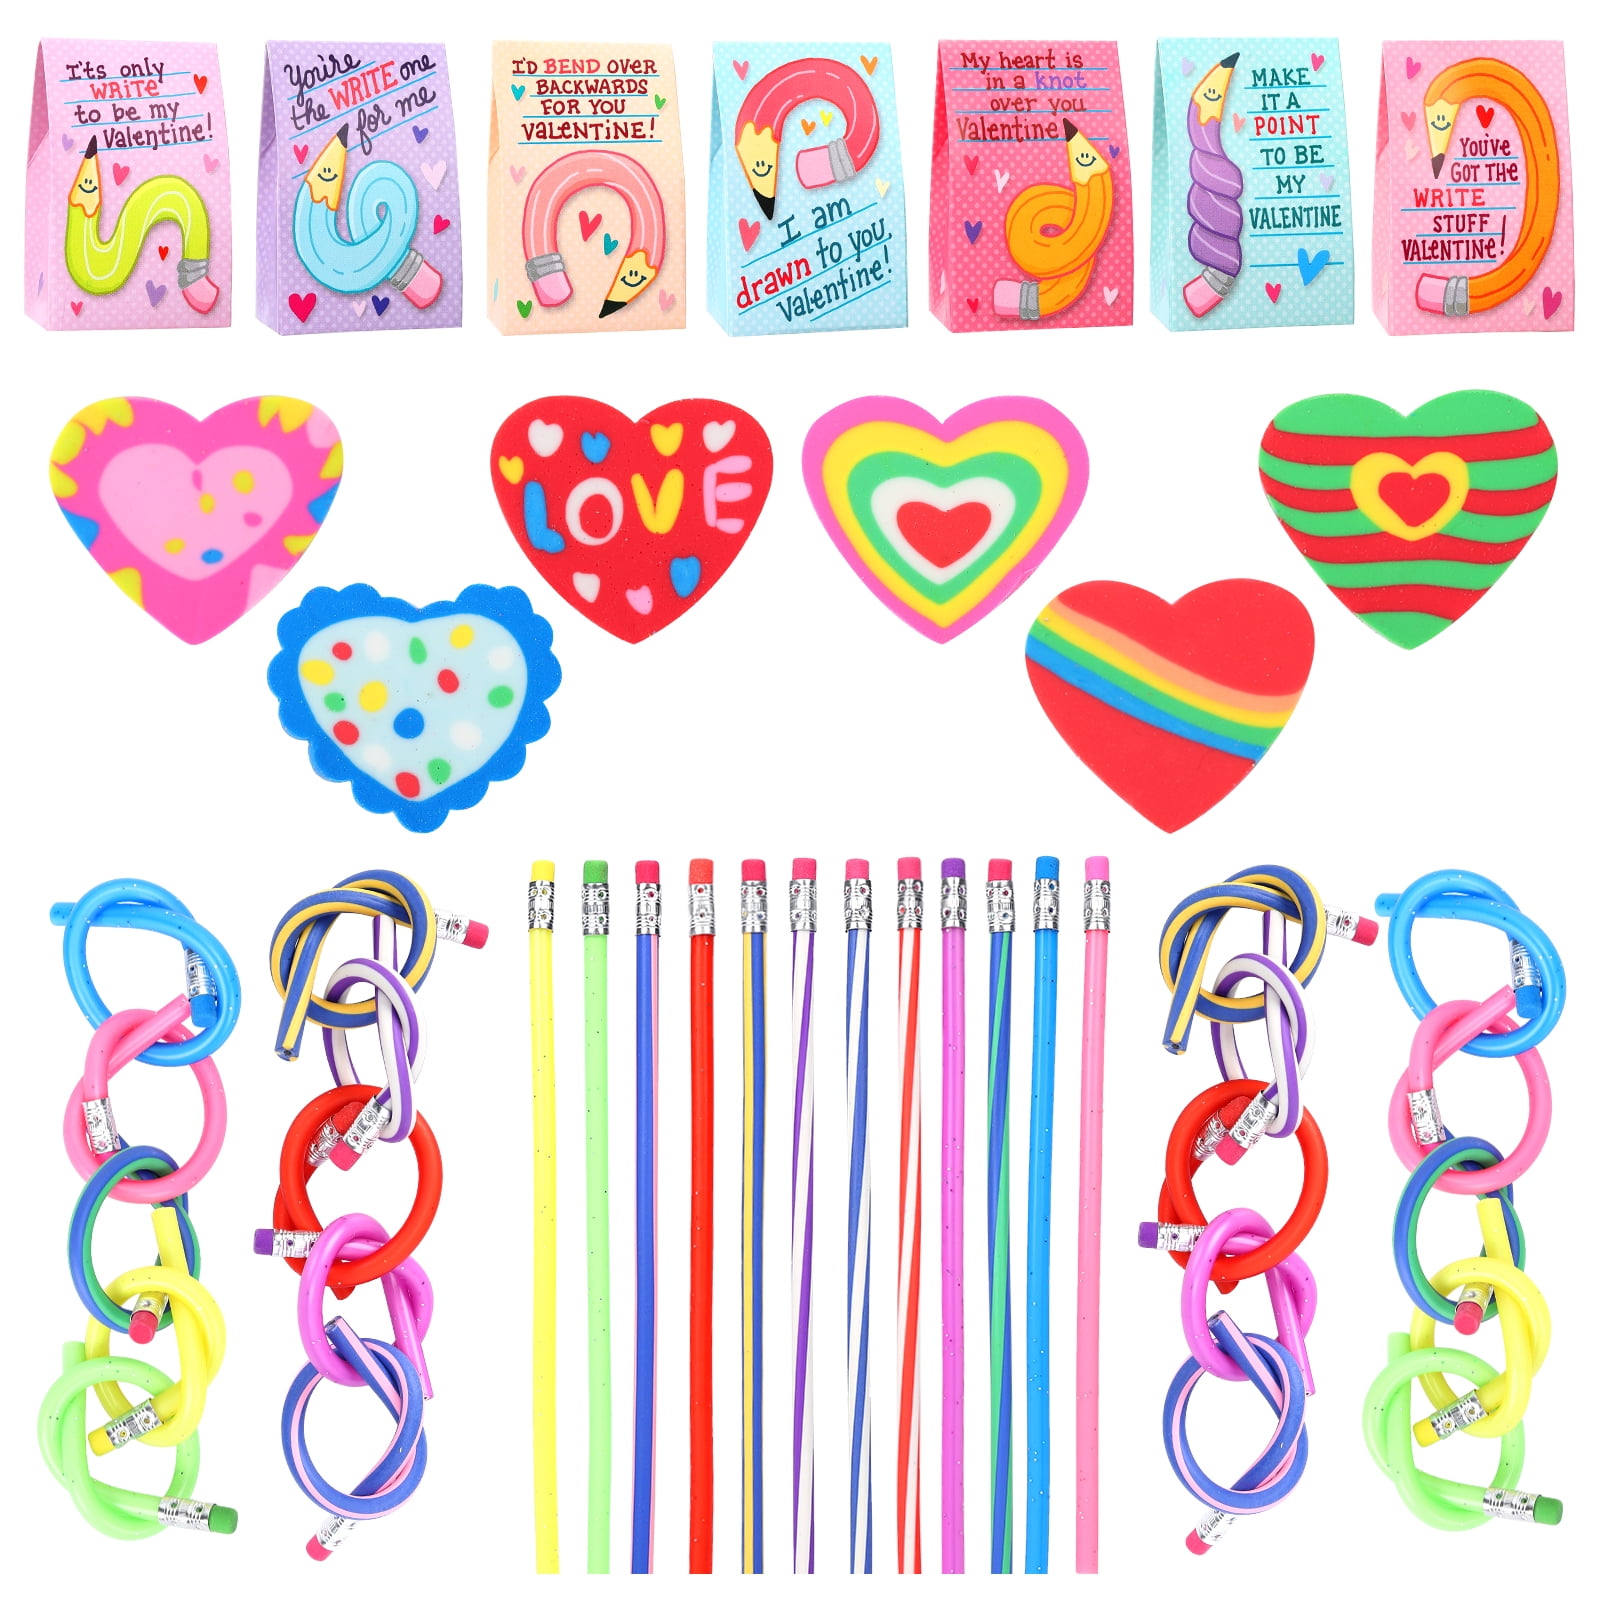 JOYIN 28 Pcs Valentine's Day Bendy Pencils Cross Through Heart Shaped Valentine Cards for Valentine's Party Favors,Gift Card, Greeting Card.